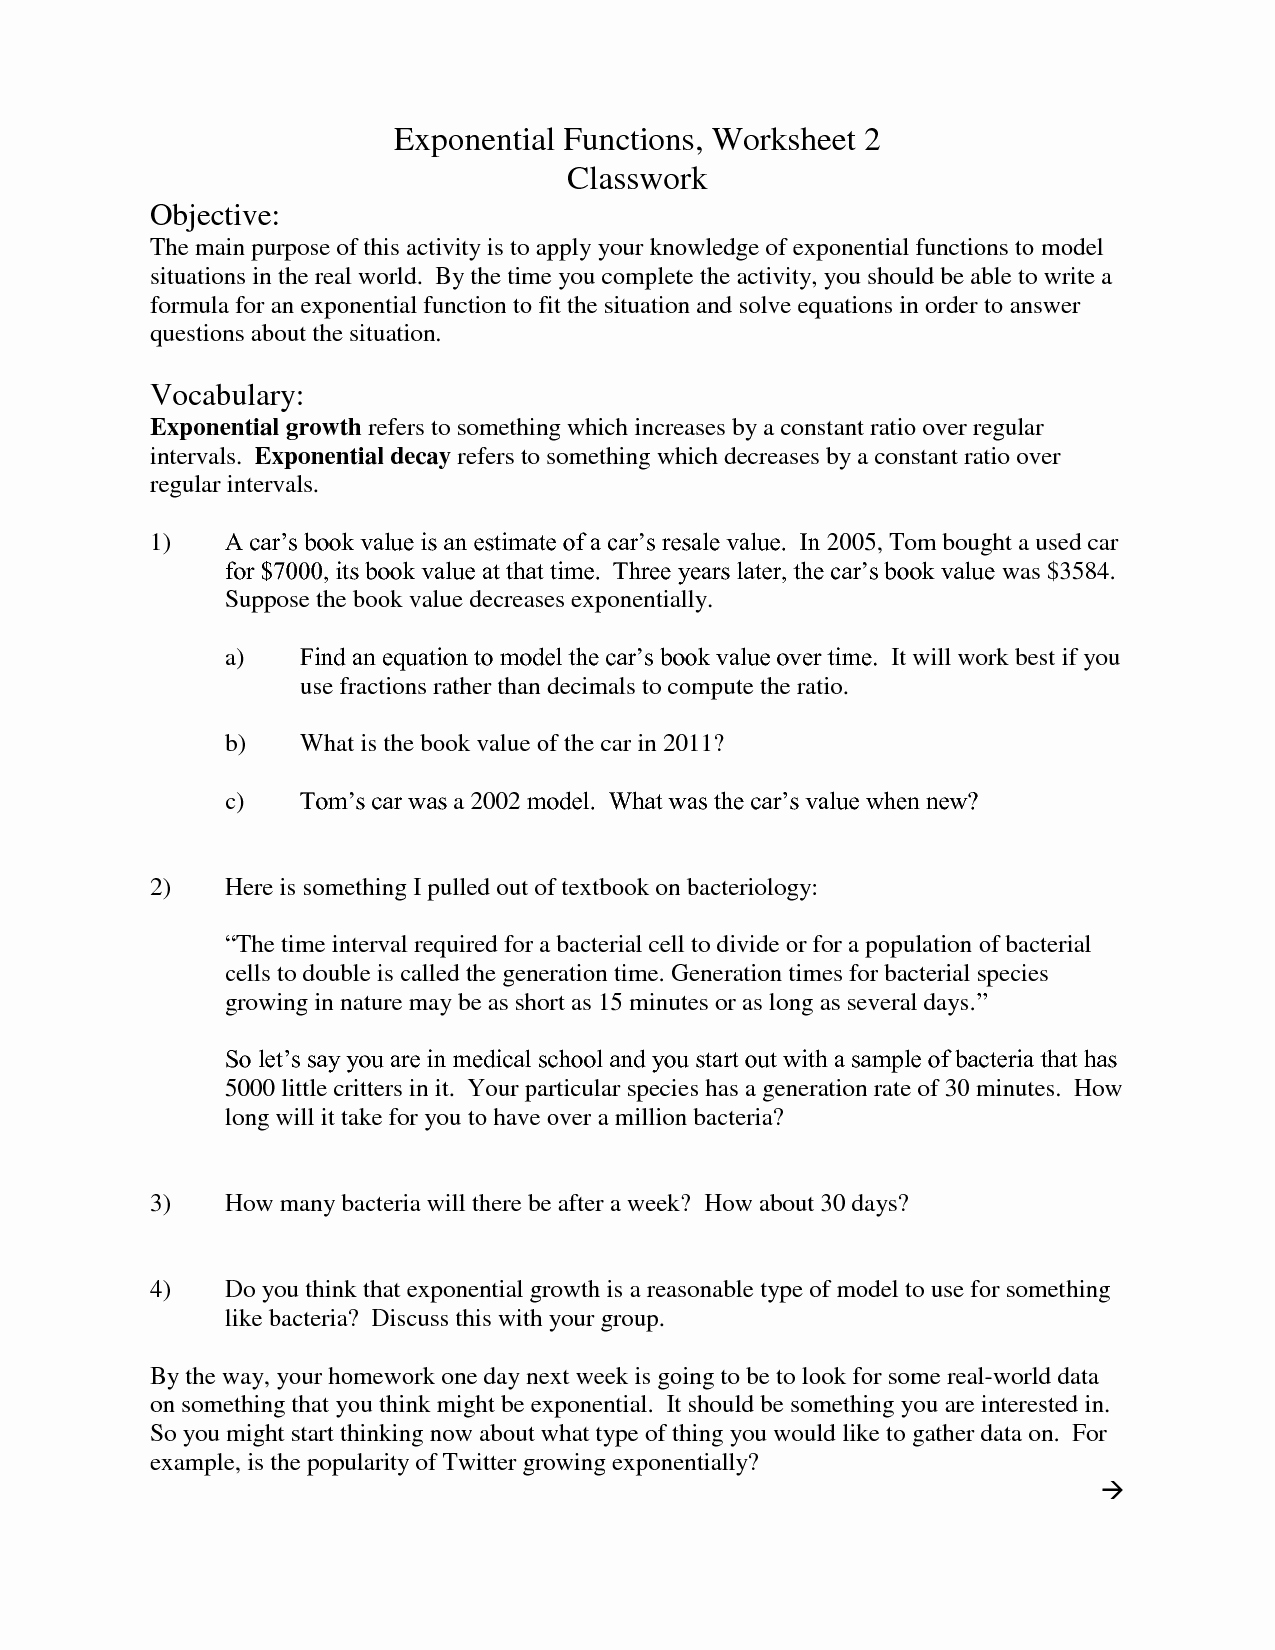 Exponential Growth and Decay Worksheet Awesome 17 Best Of Linear Function Word Problems Worksheet